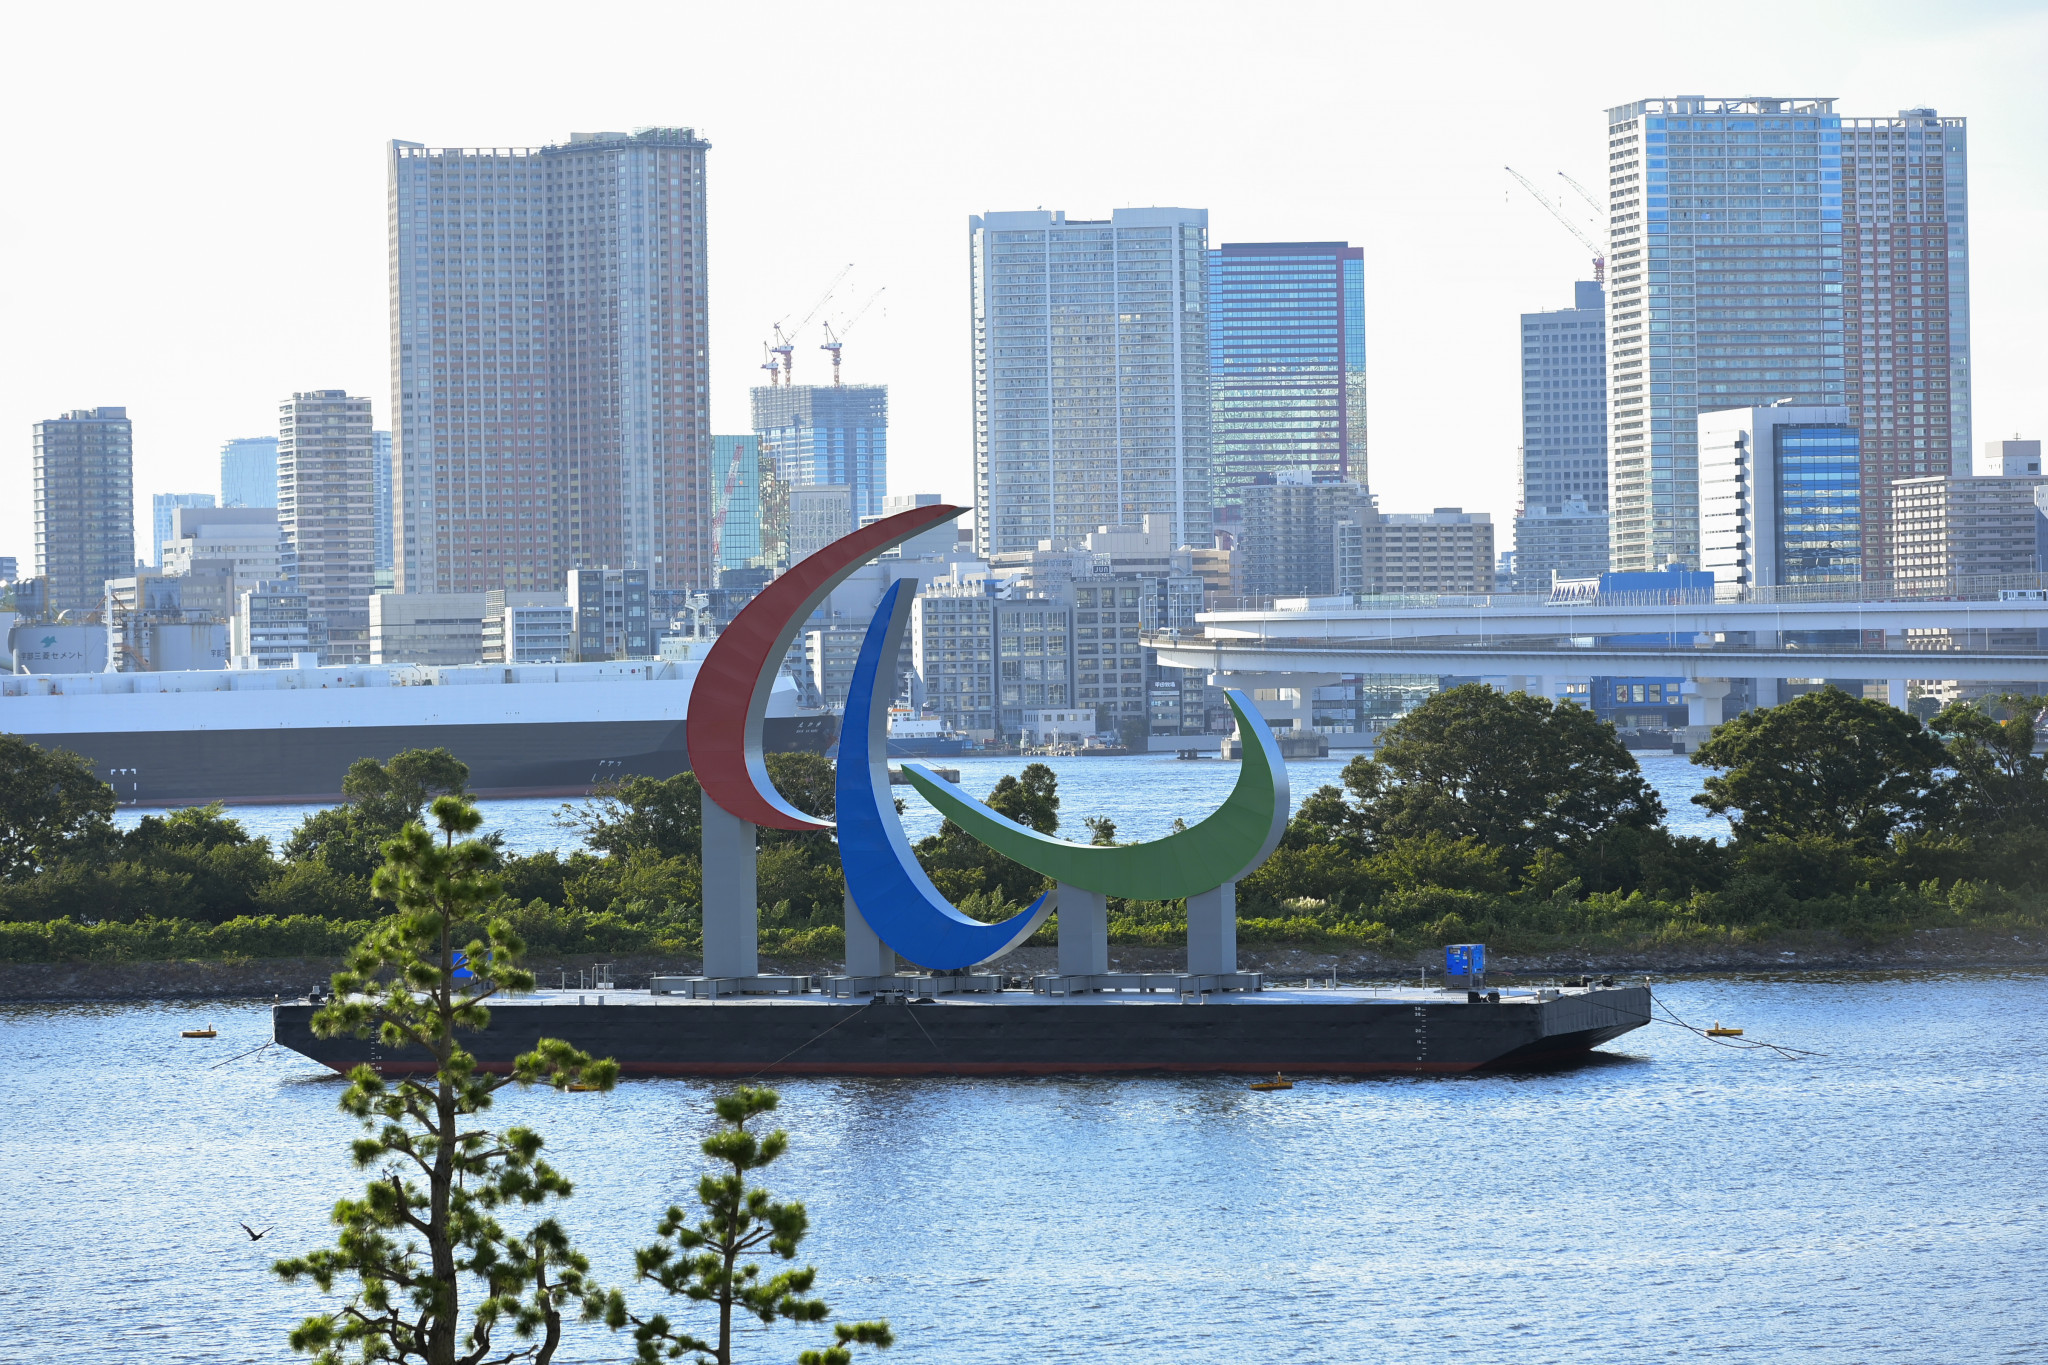 The Agitos logo has been removed from Tokyo Bay ©Getty Images